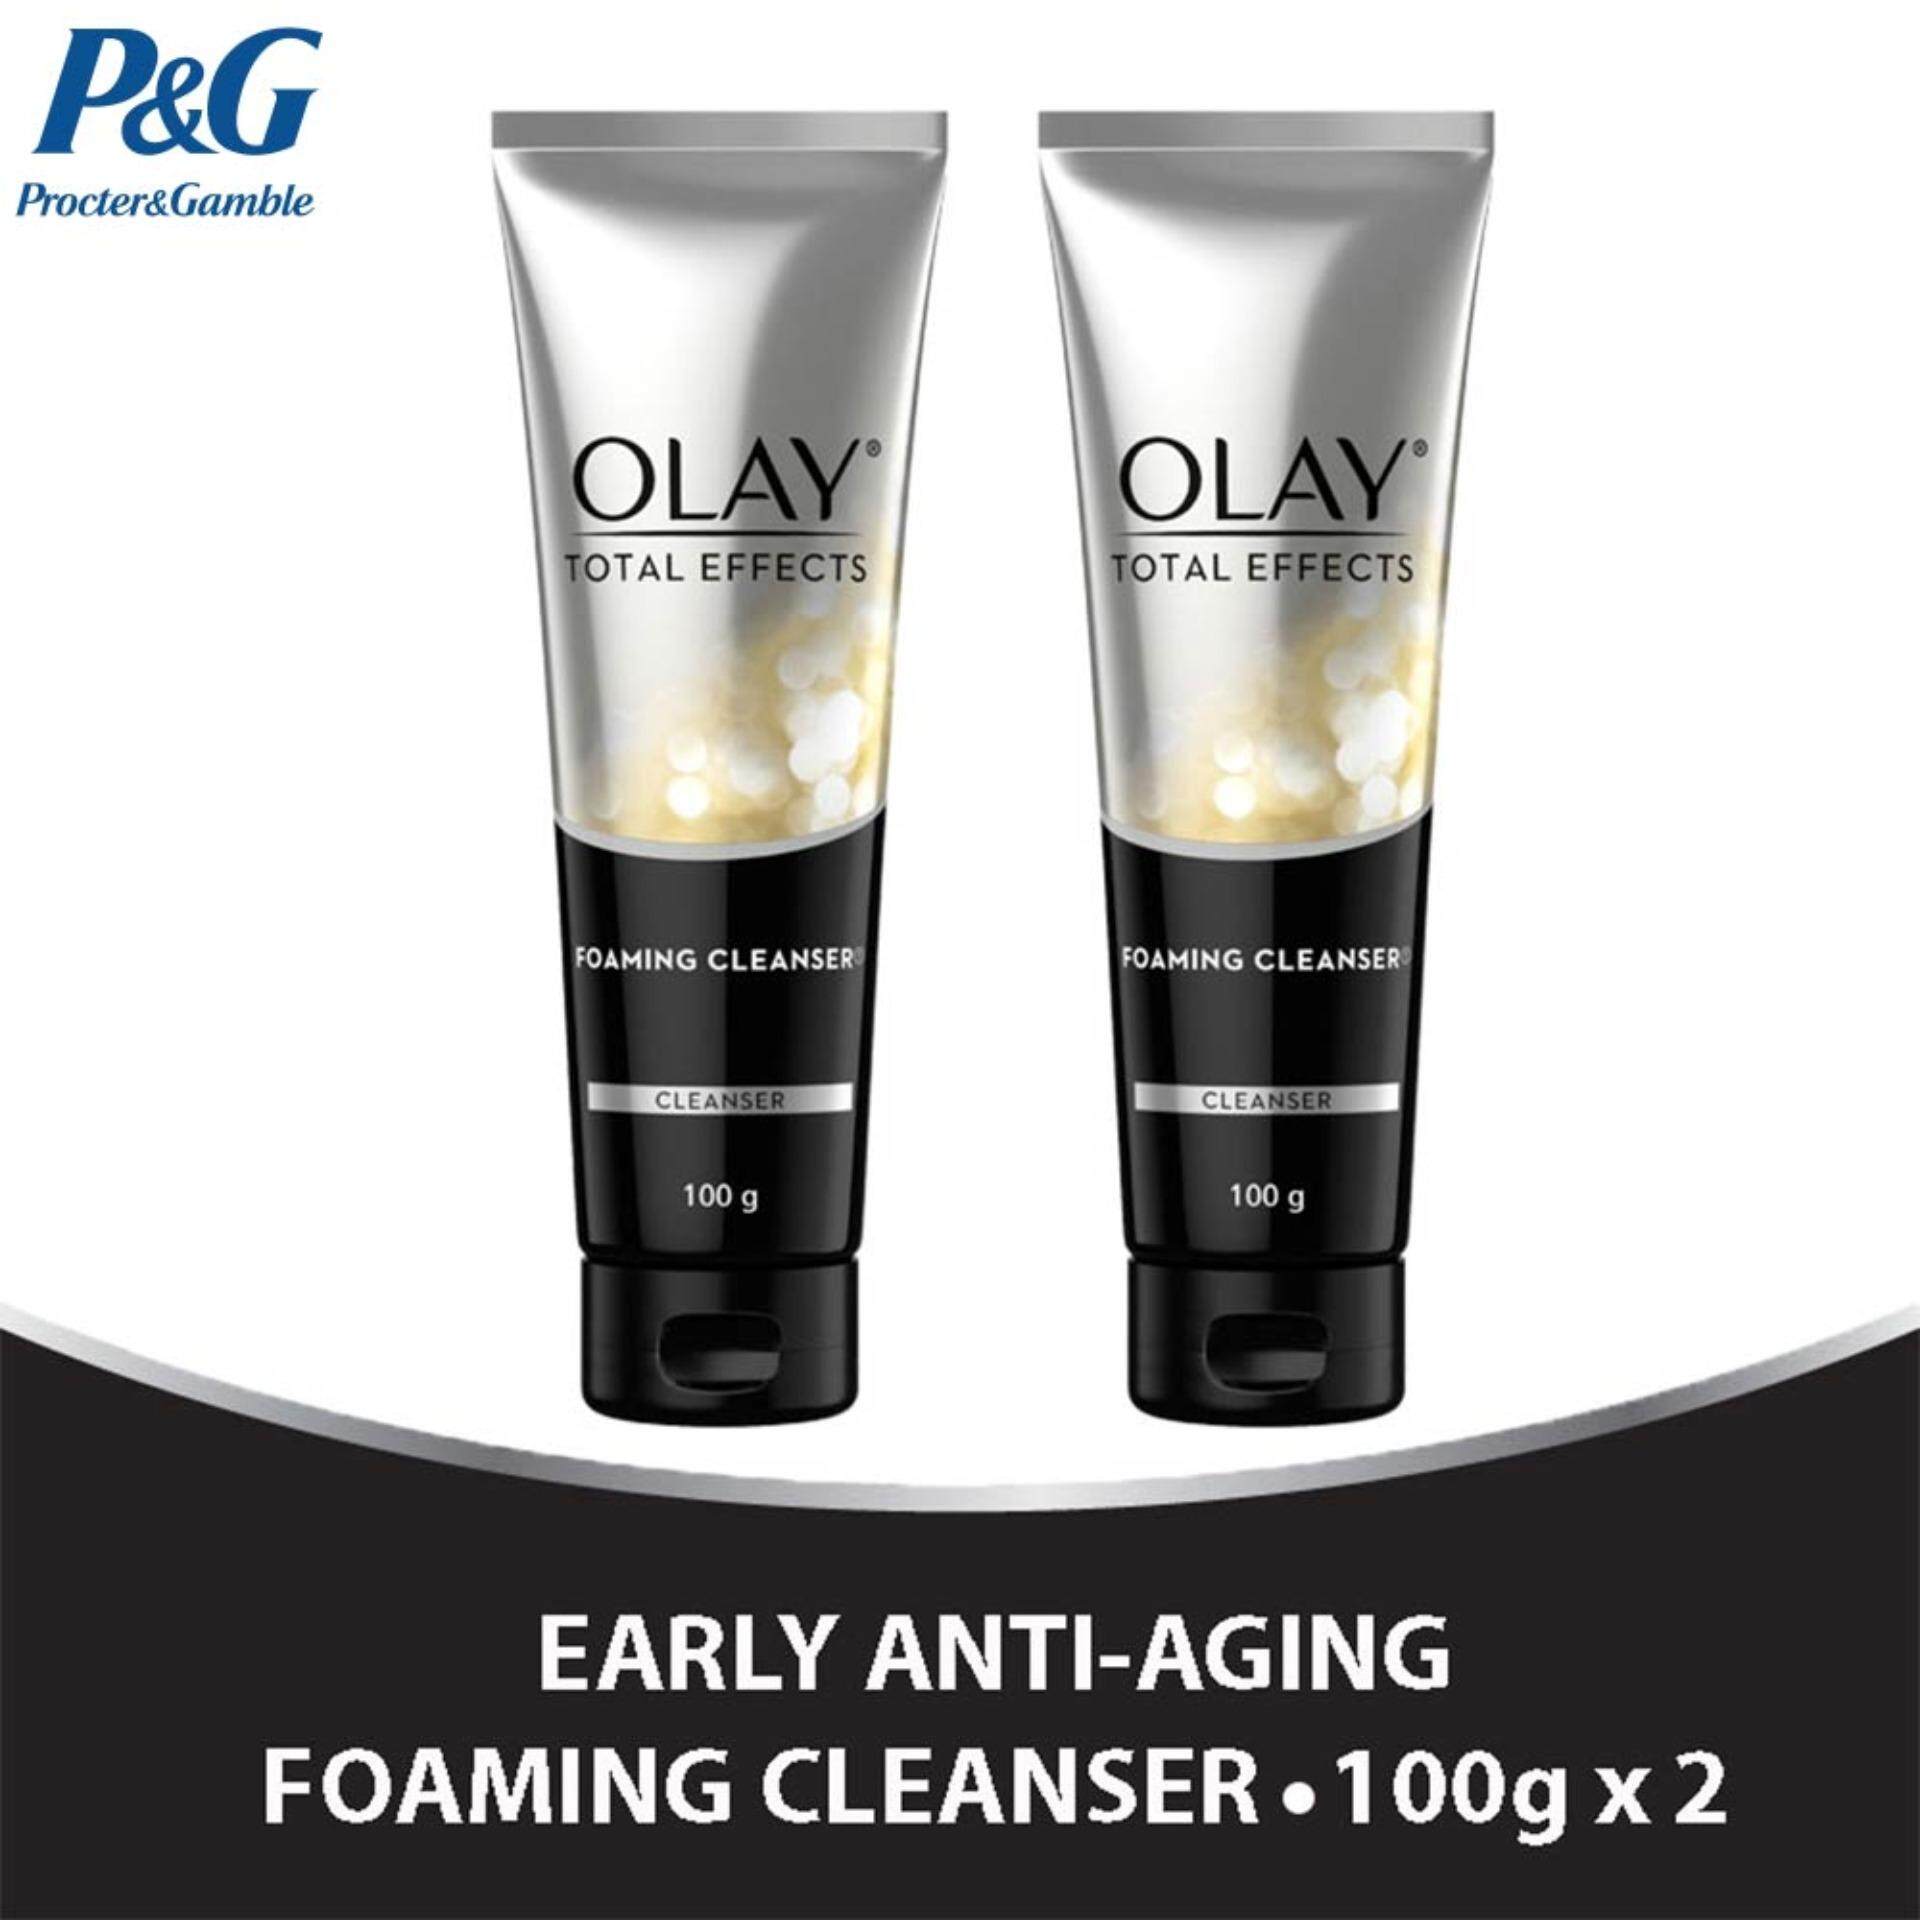 Olay Total Effects Foaming Cleanser 100g [Bundle of 2]